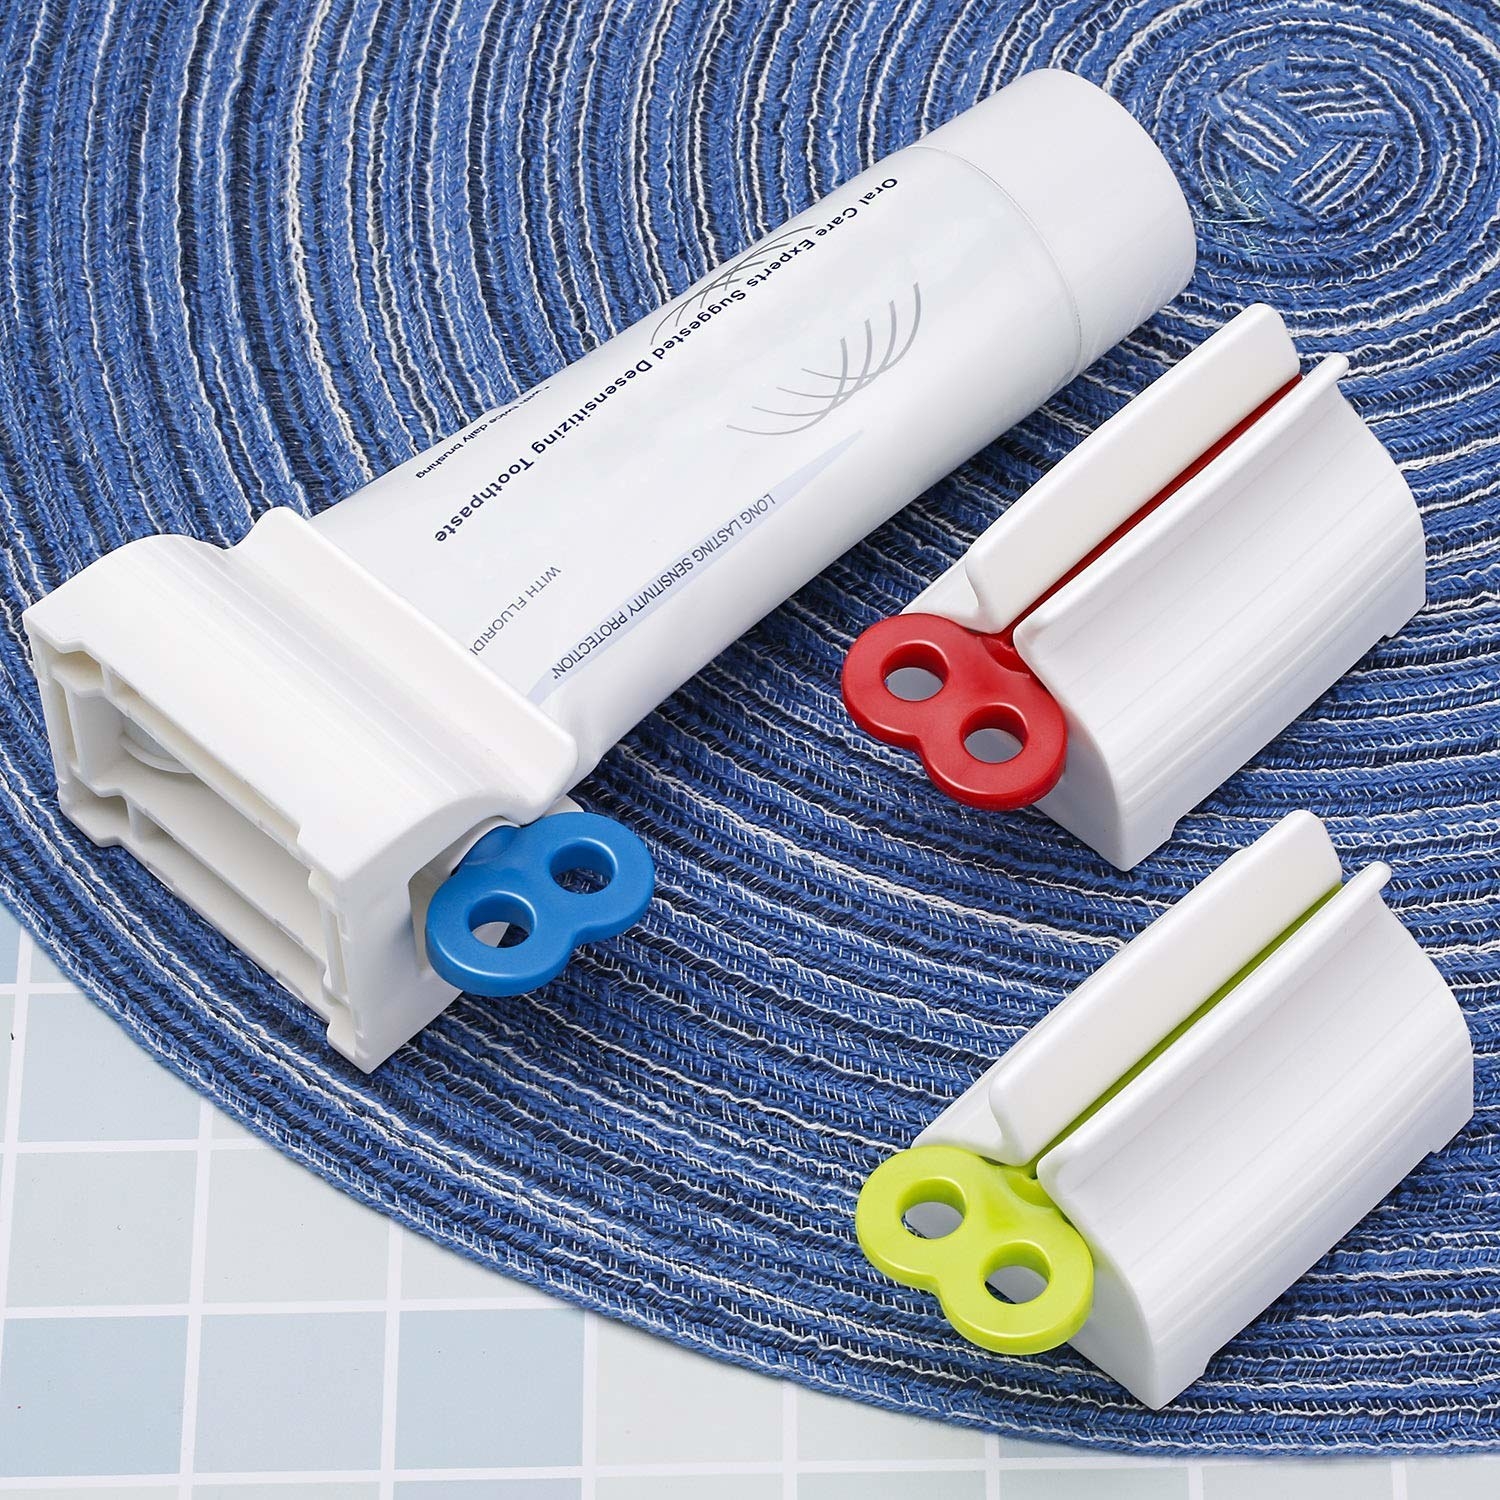 3 toothpaste squeezers on a blue mat